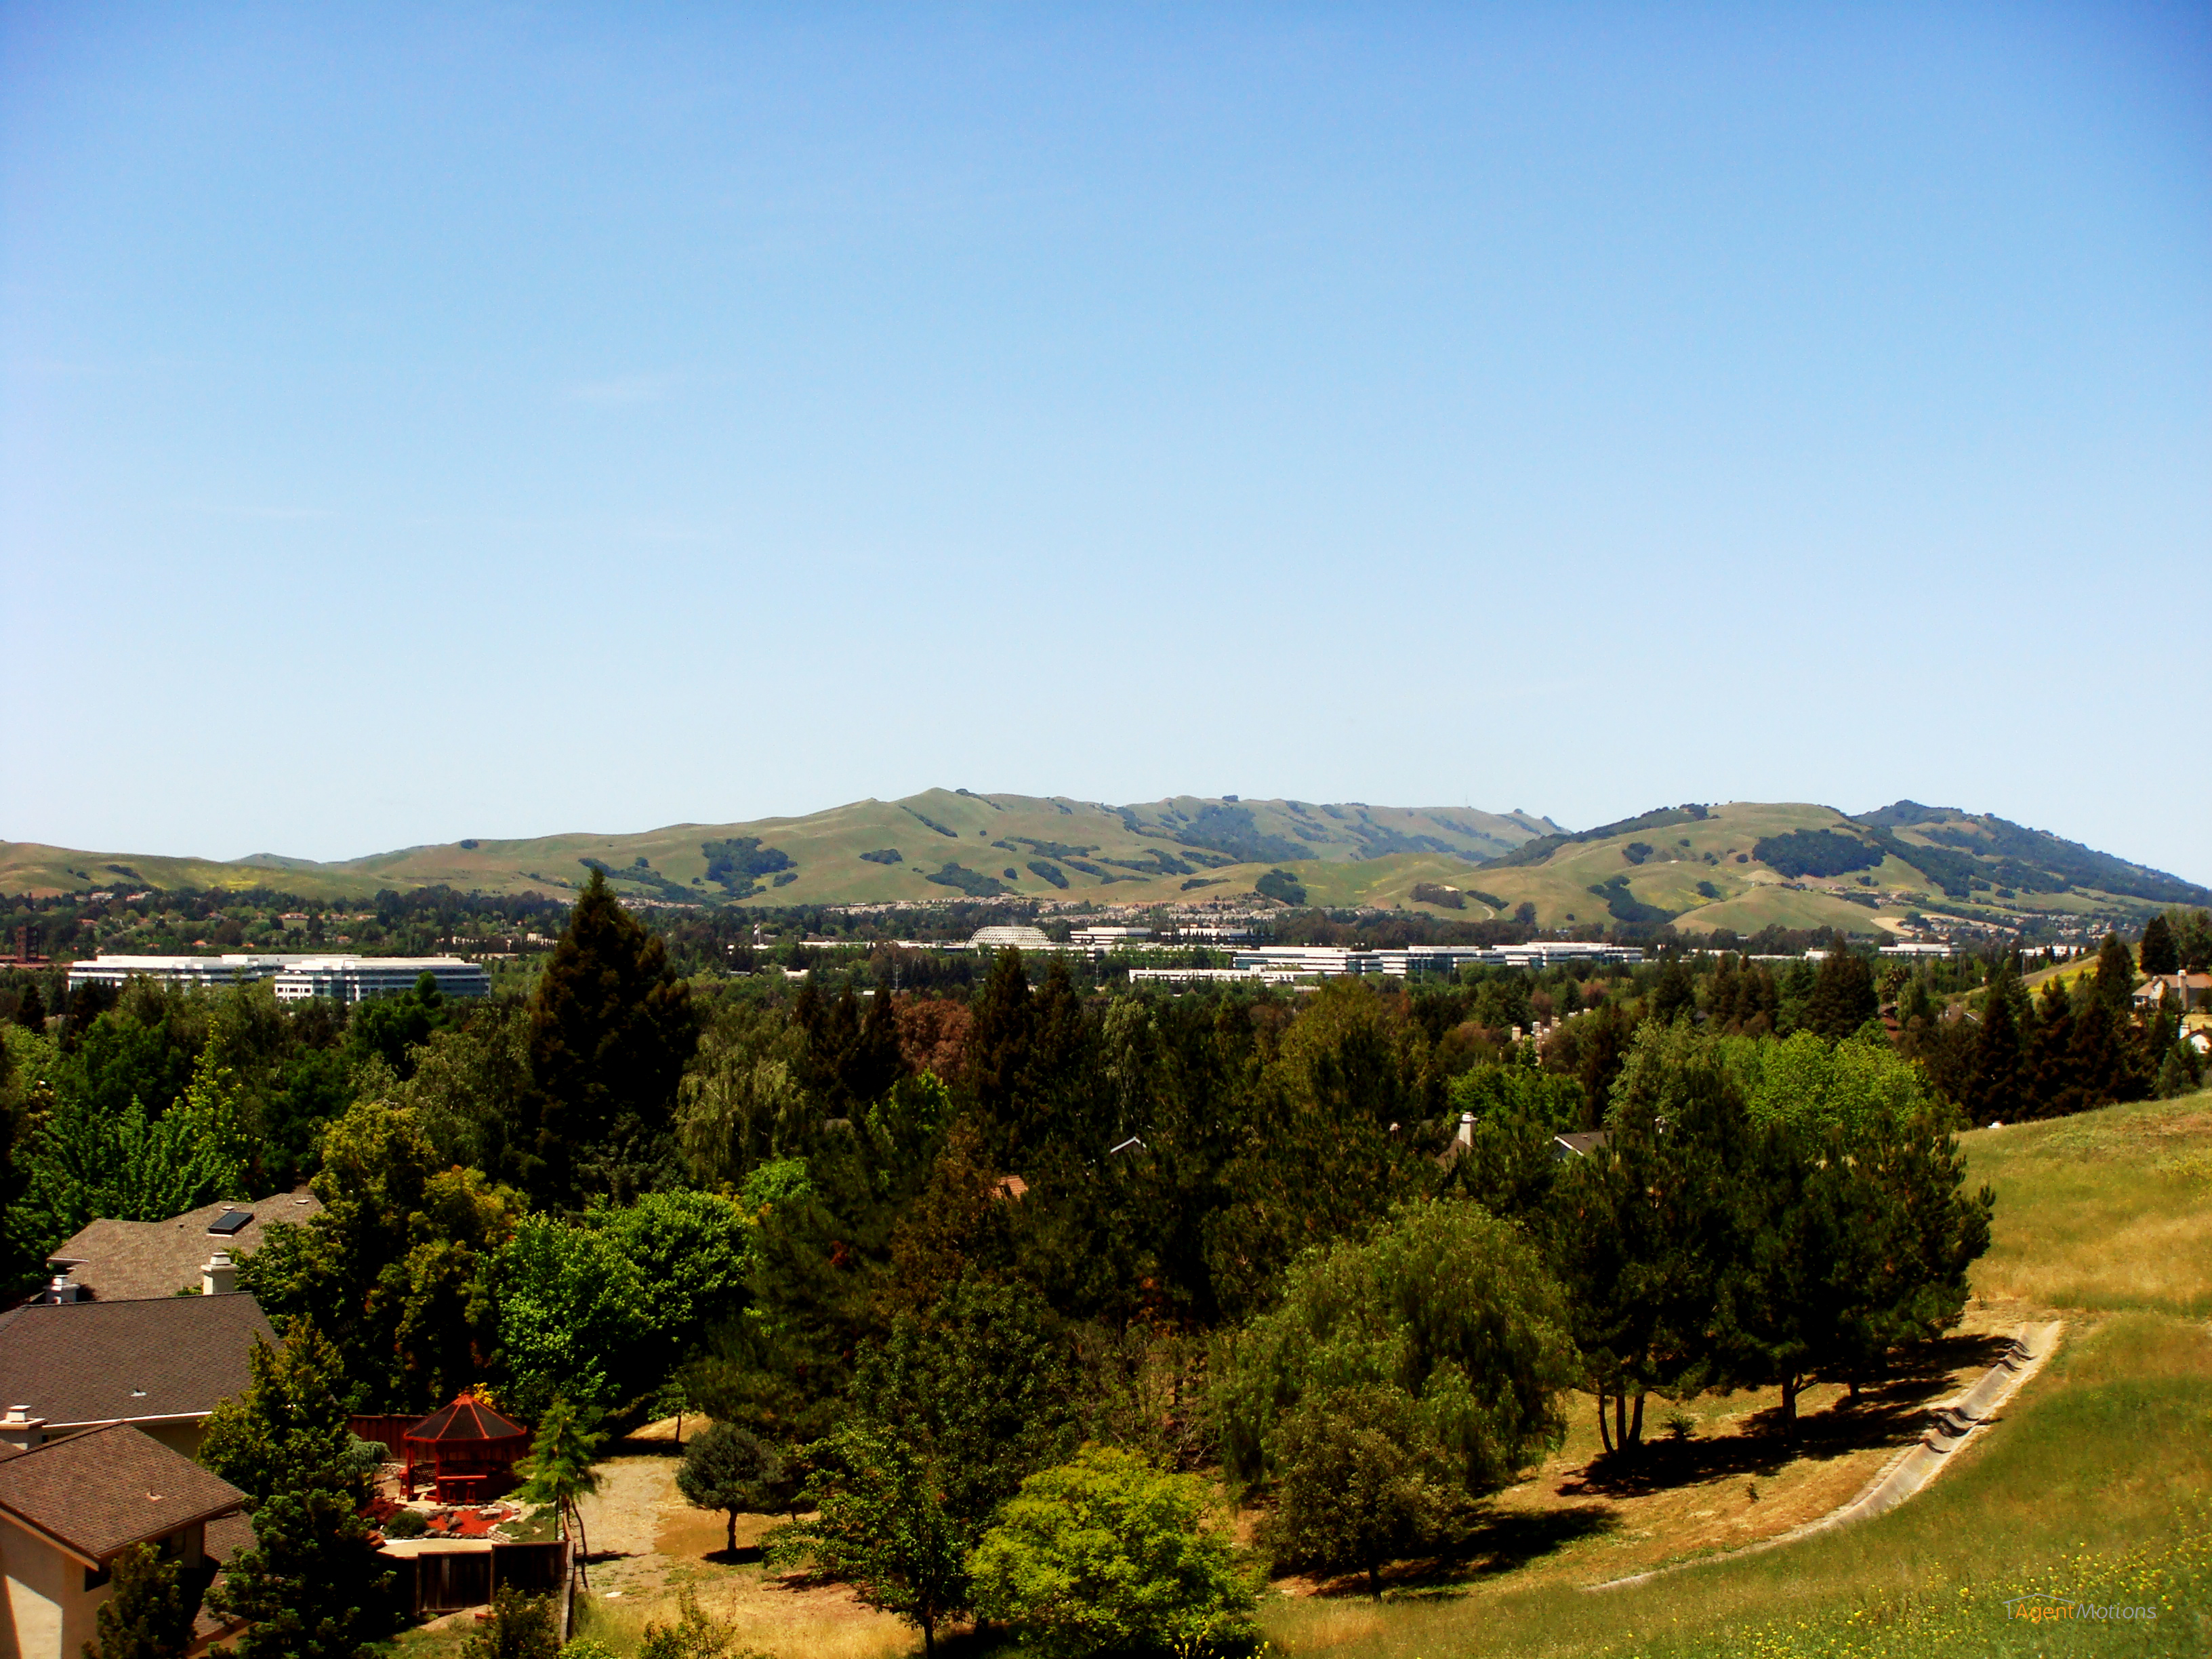 San Ramon scene for use by real estate agents in their marketing